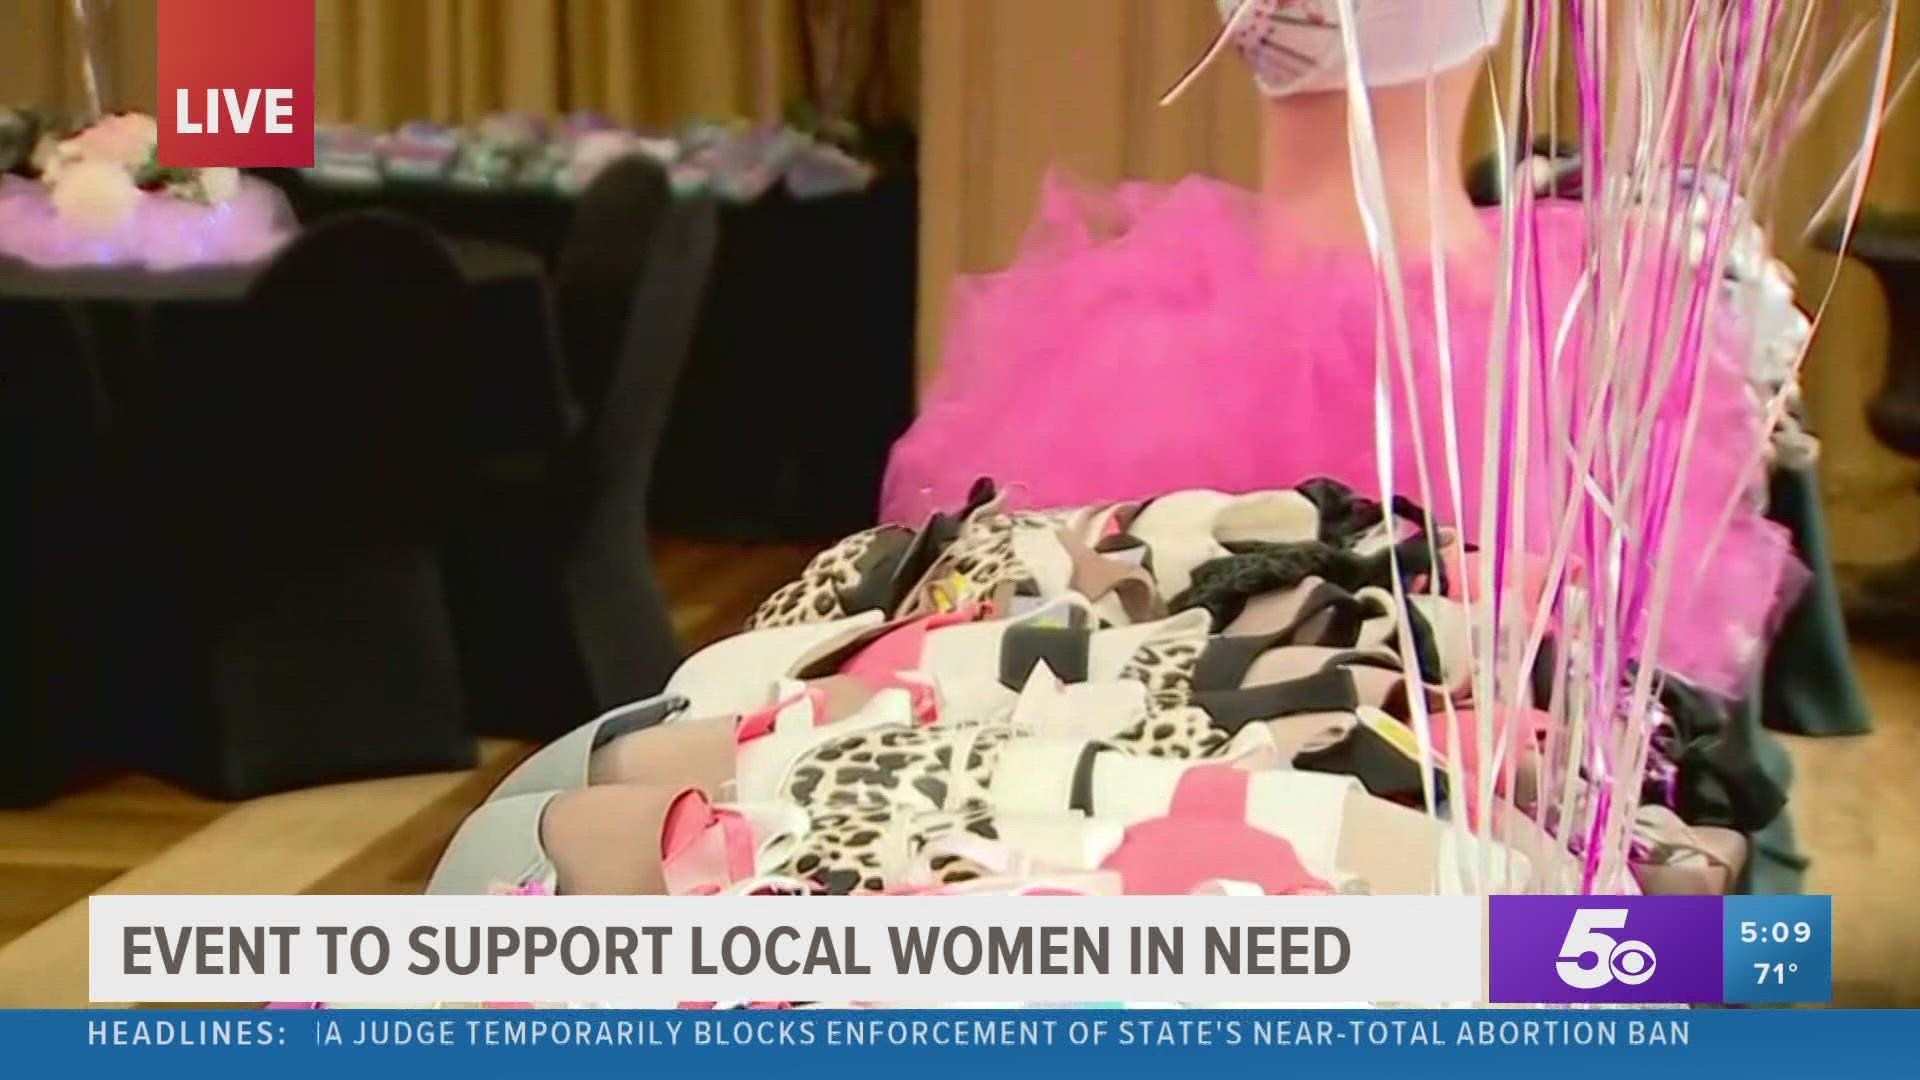 The Help the Girls event is benefiting local women's shelters by providing gently used bras and underwear to those in need.